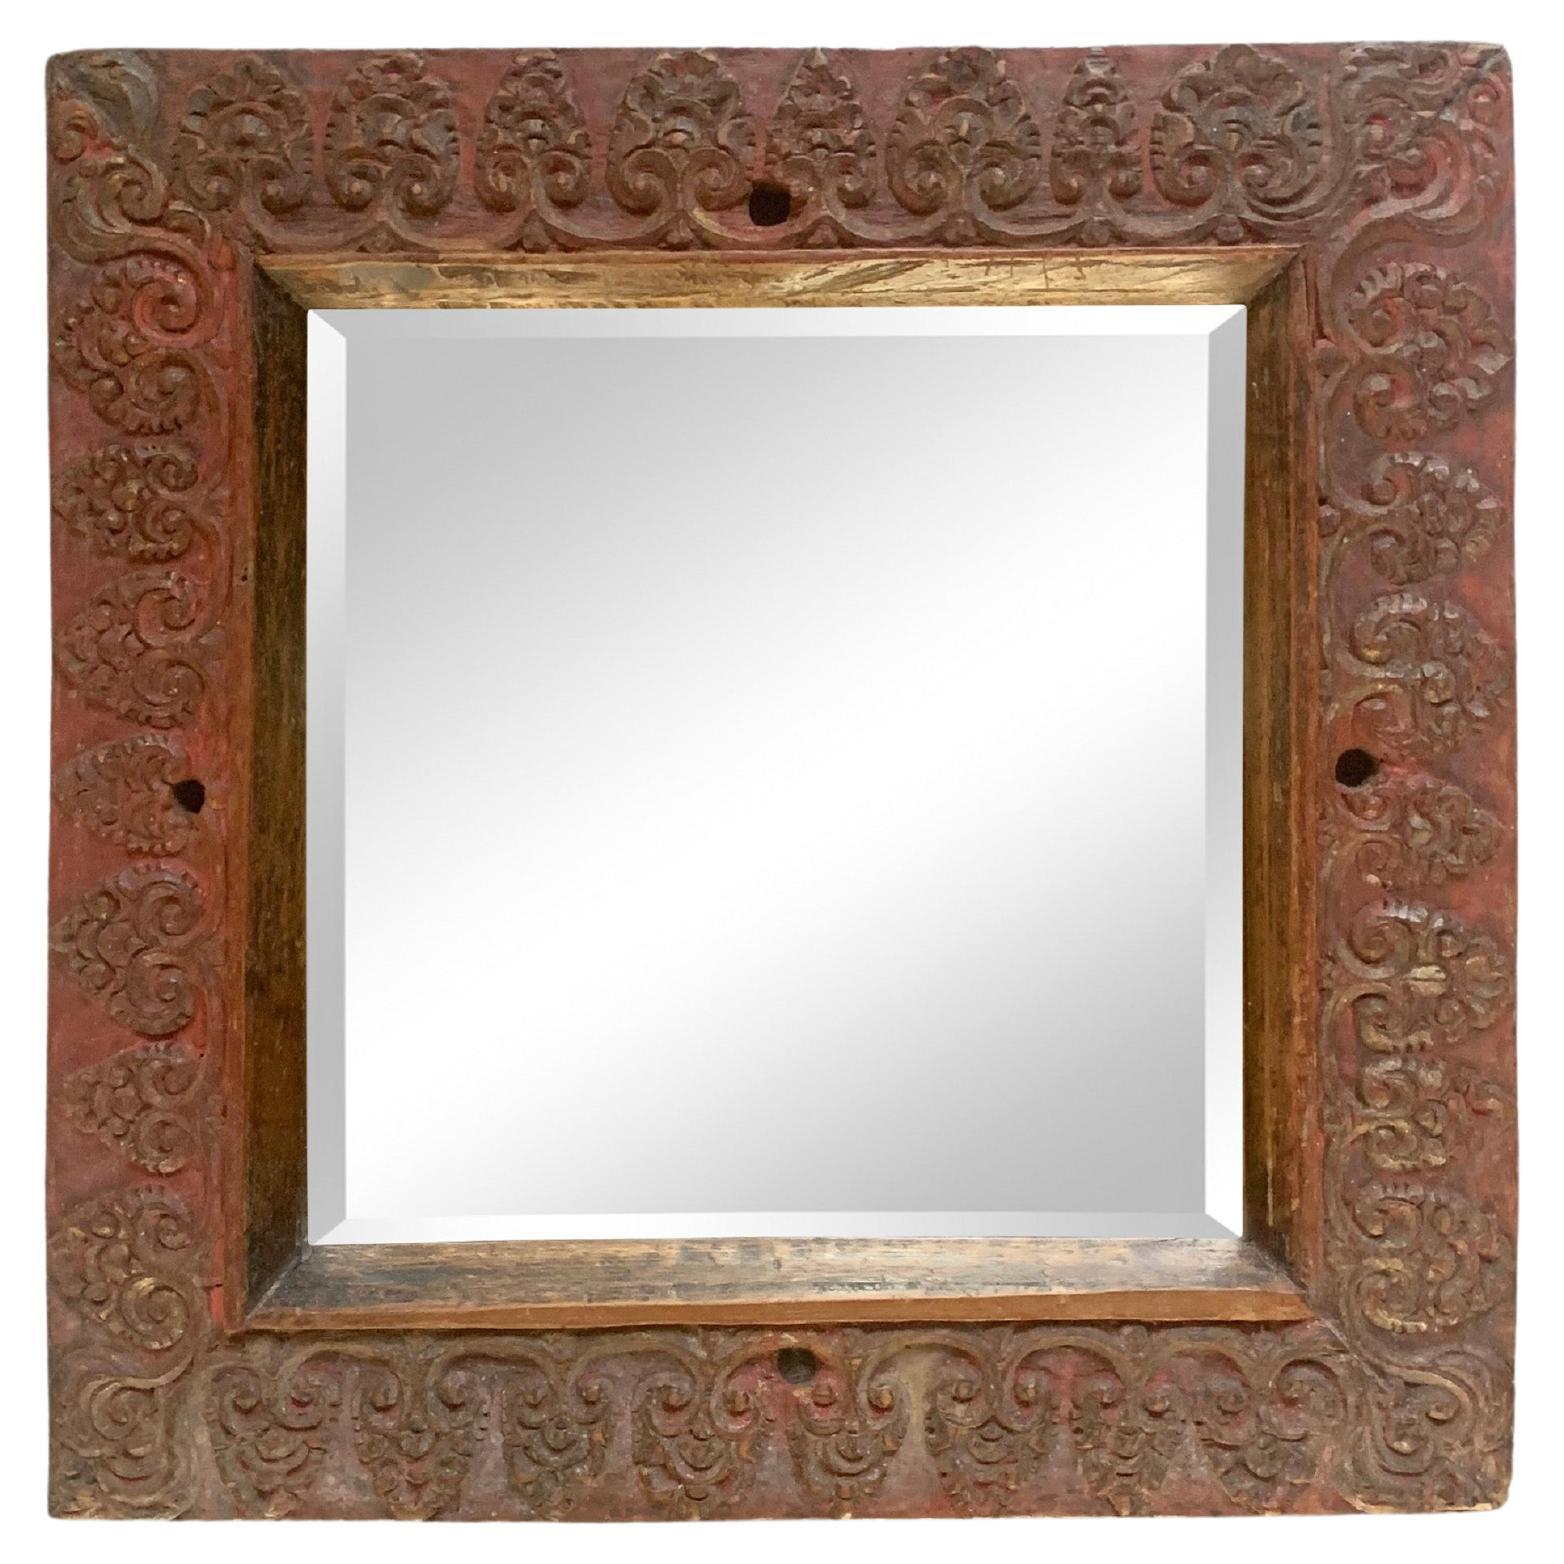 Vintage Balinese Hand-Carved Mirror with Red Polychrome, c. 1950